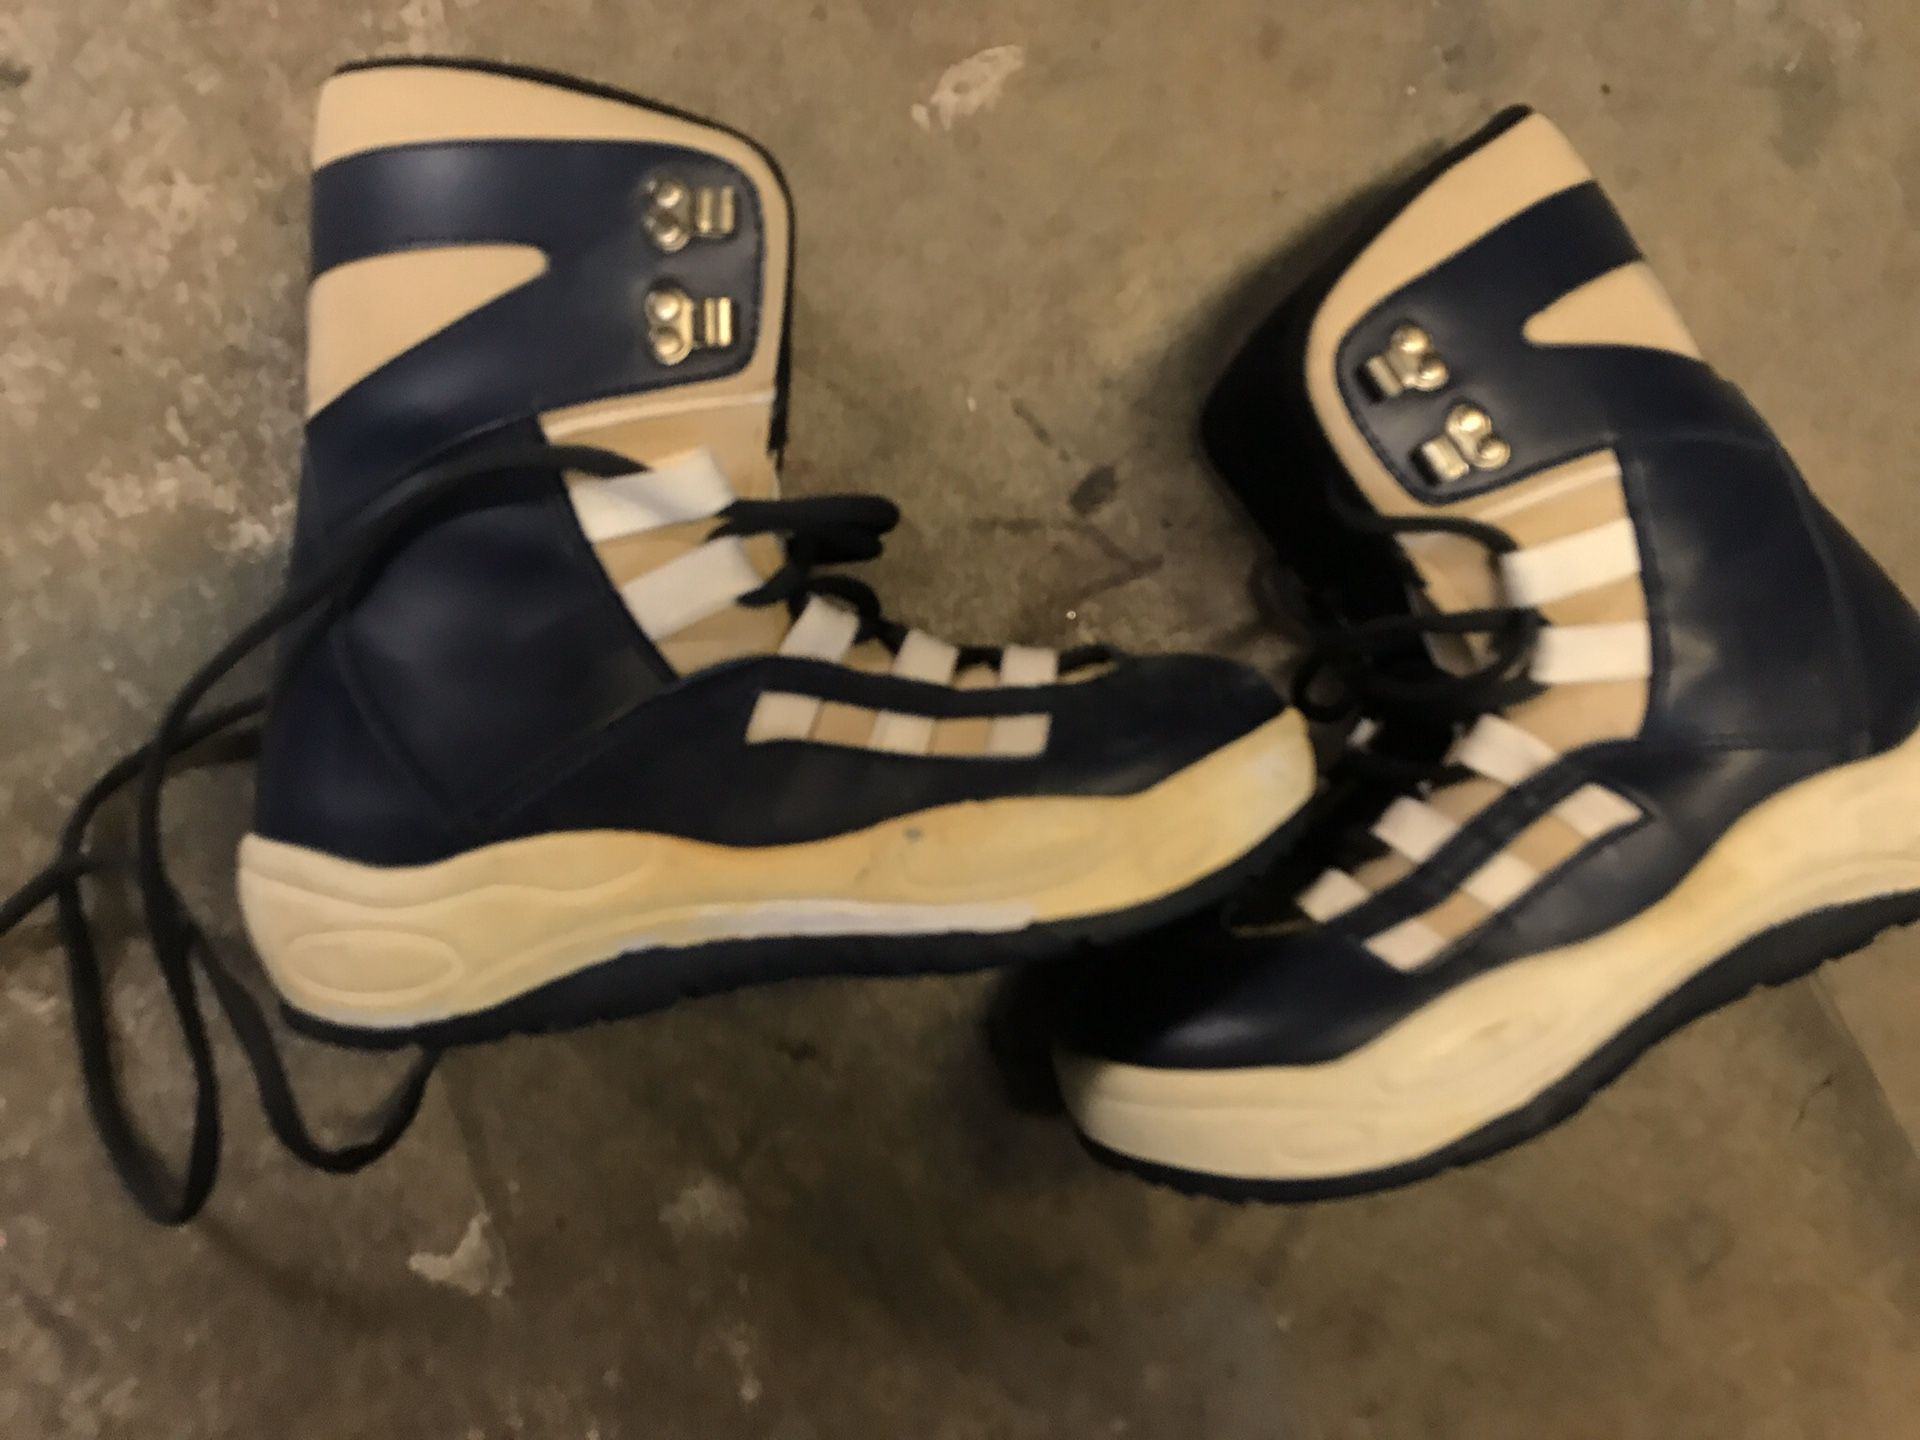 Snowboard boots woman’s size 8